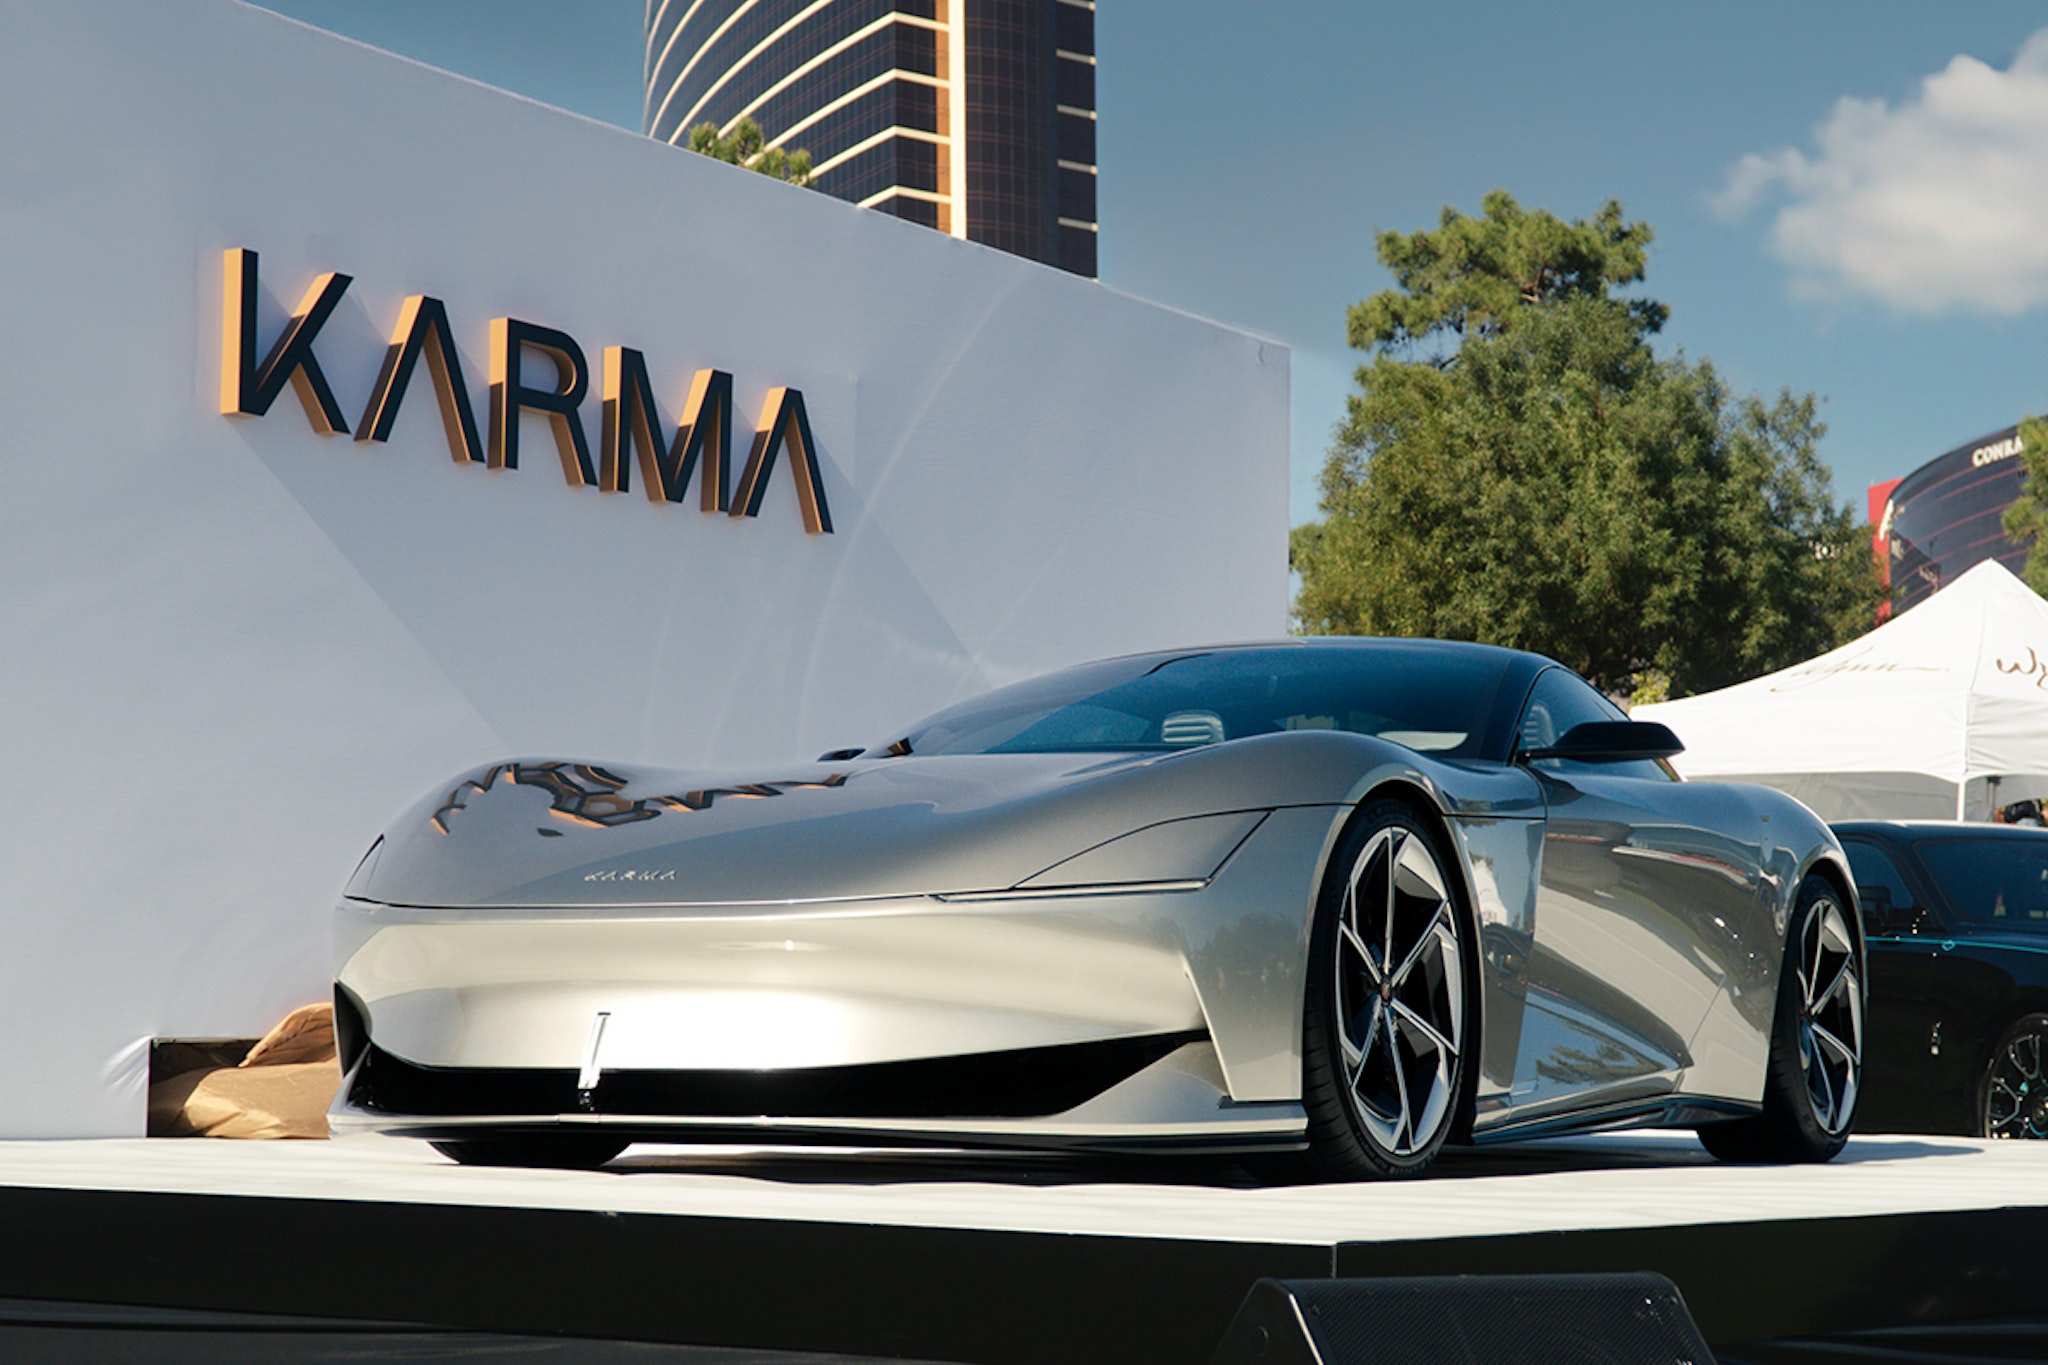 Karma at Concours 2023